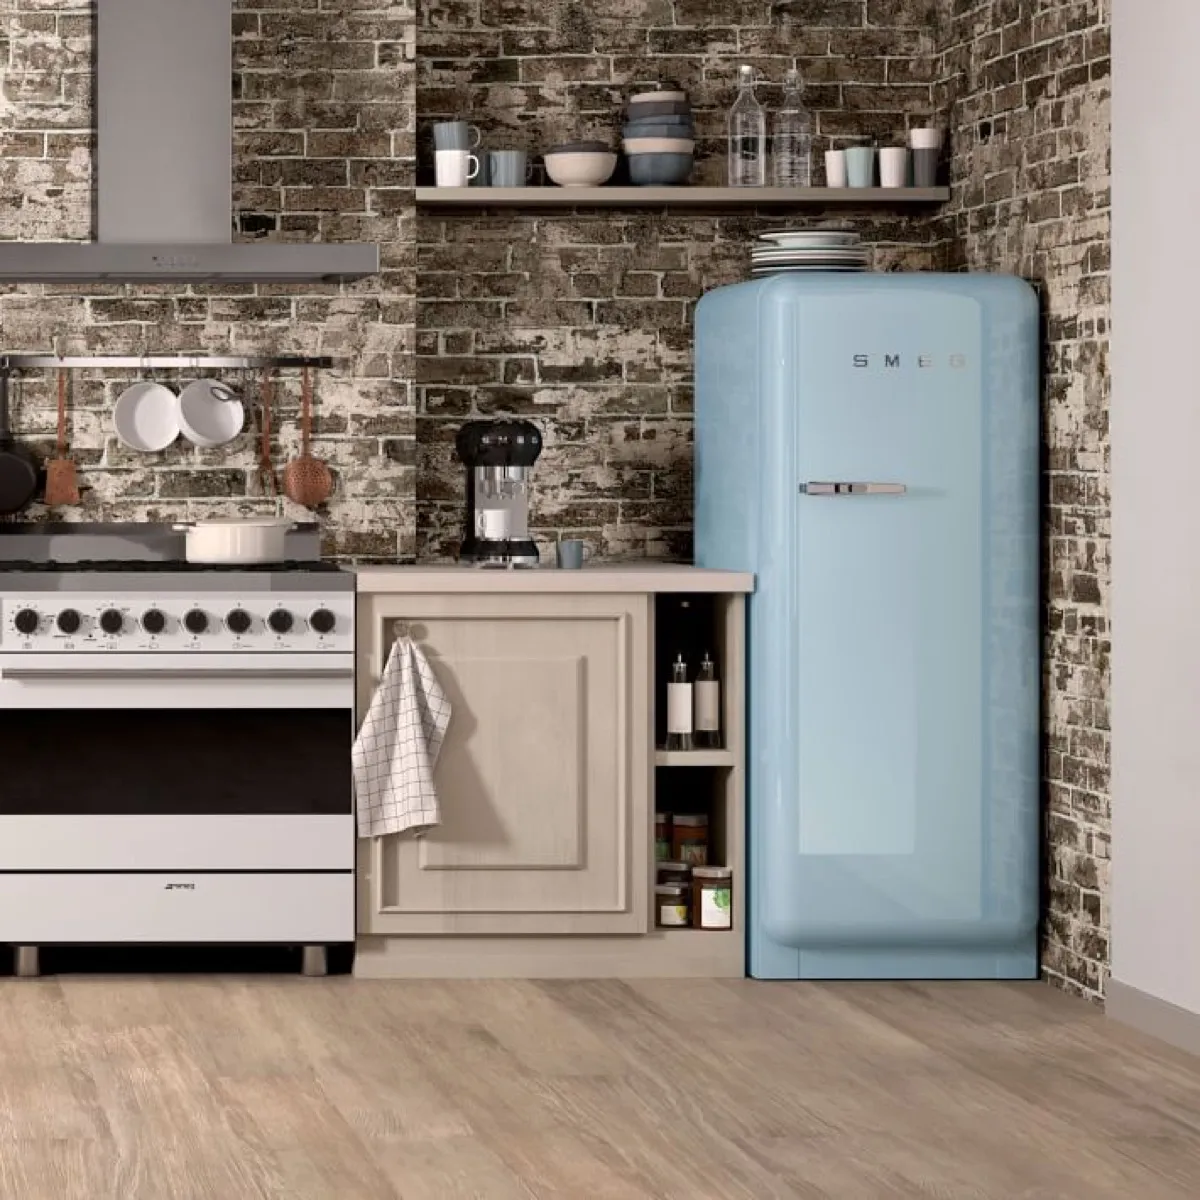 product shot of a baby blue full-size SMEG fridge in a rustic kitchen